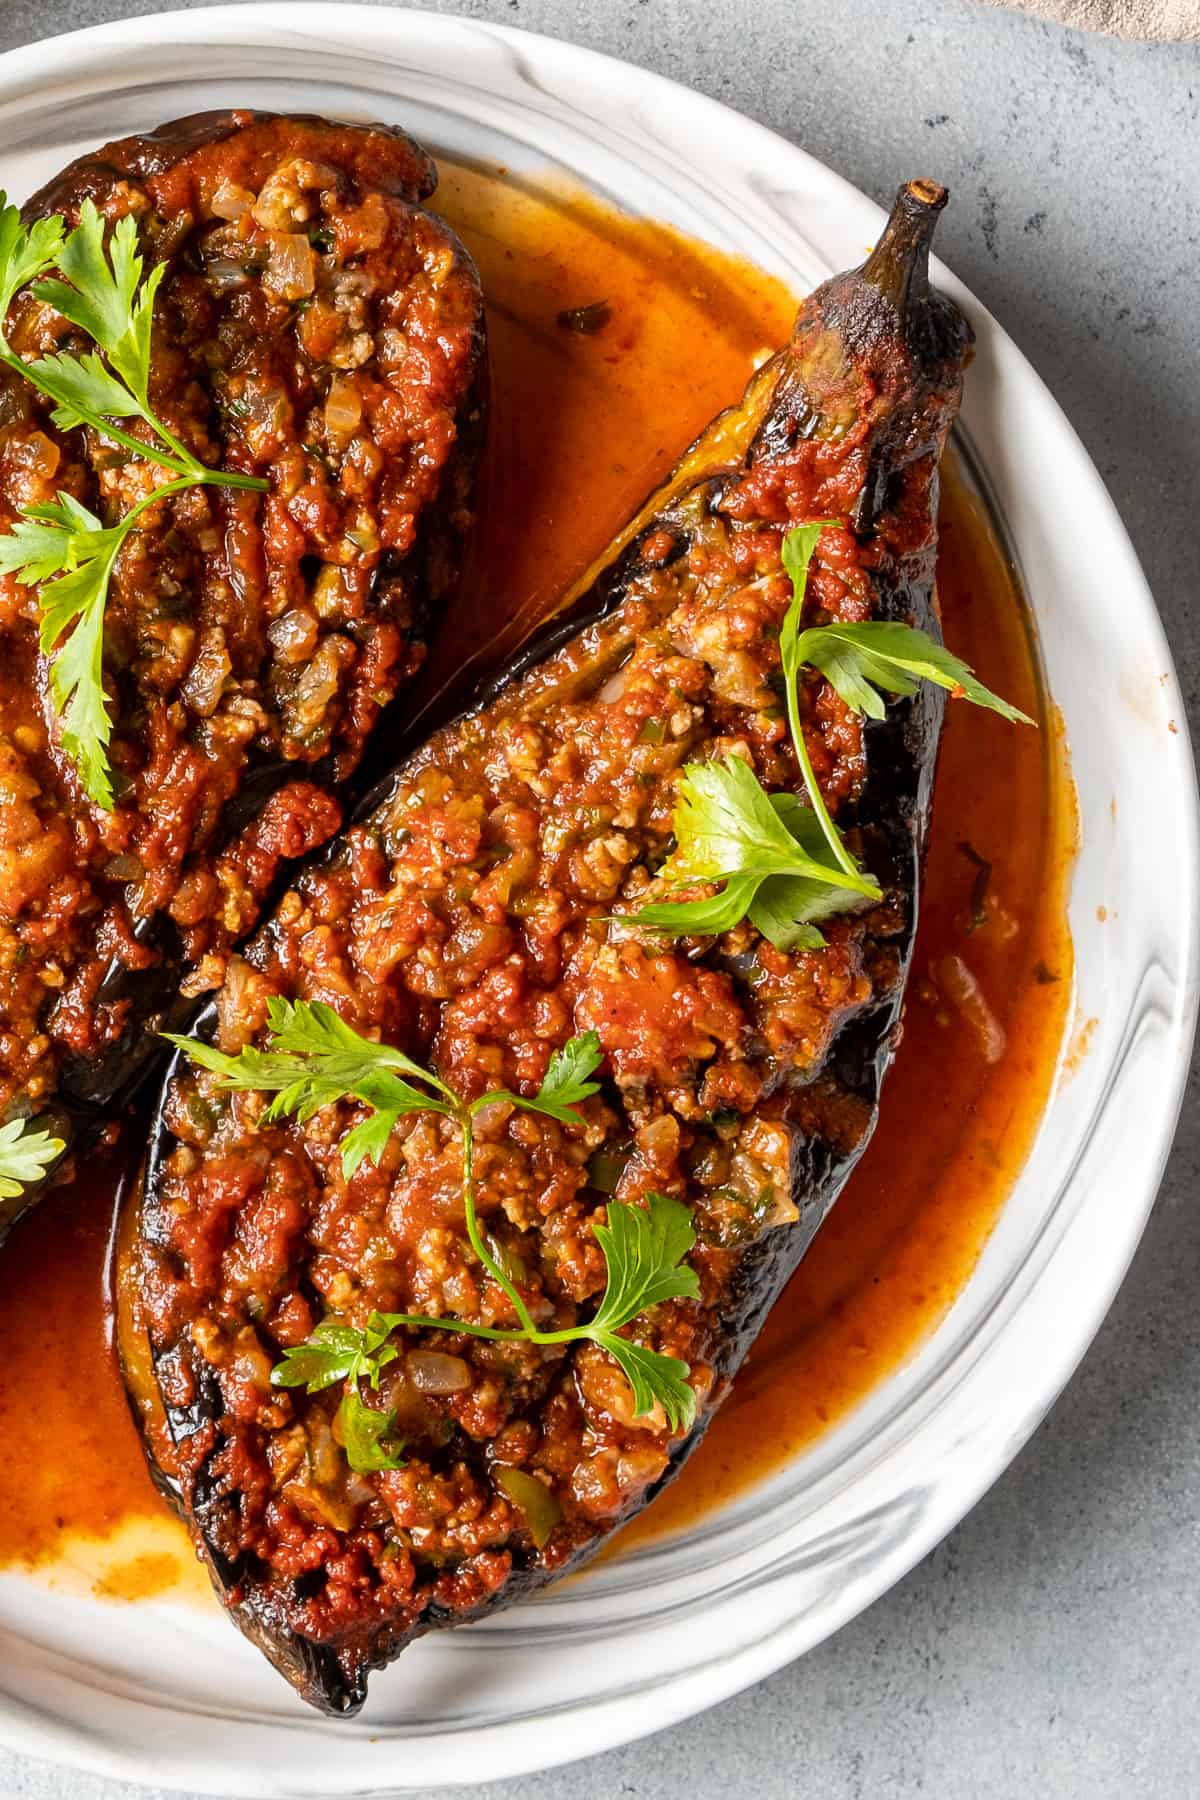 Stuffed eggplant on a plate and garnished with cilantro.